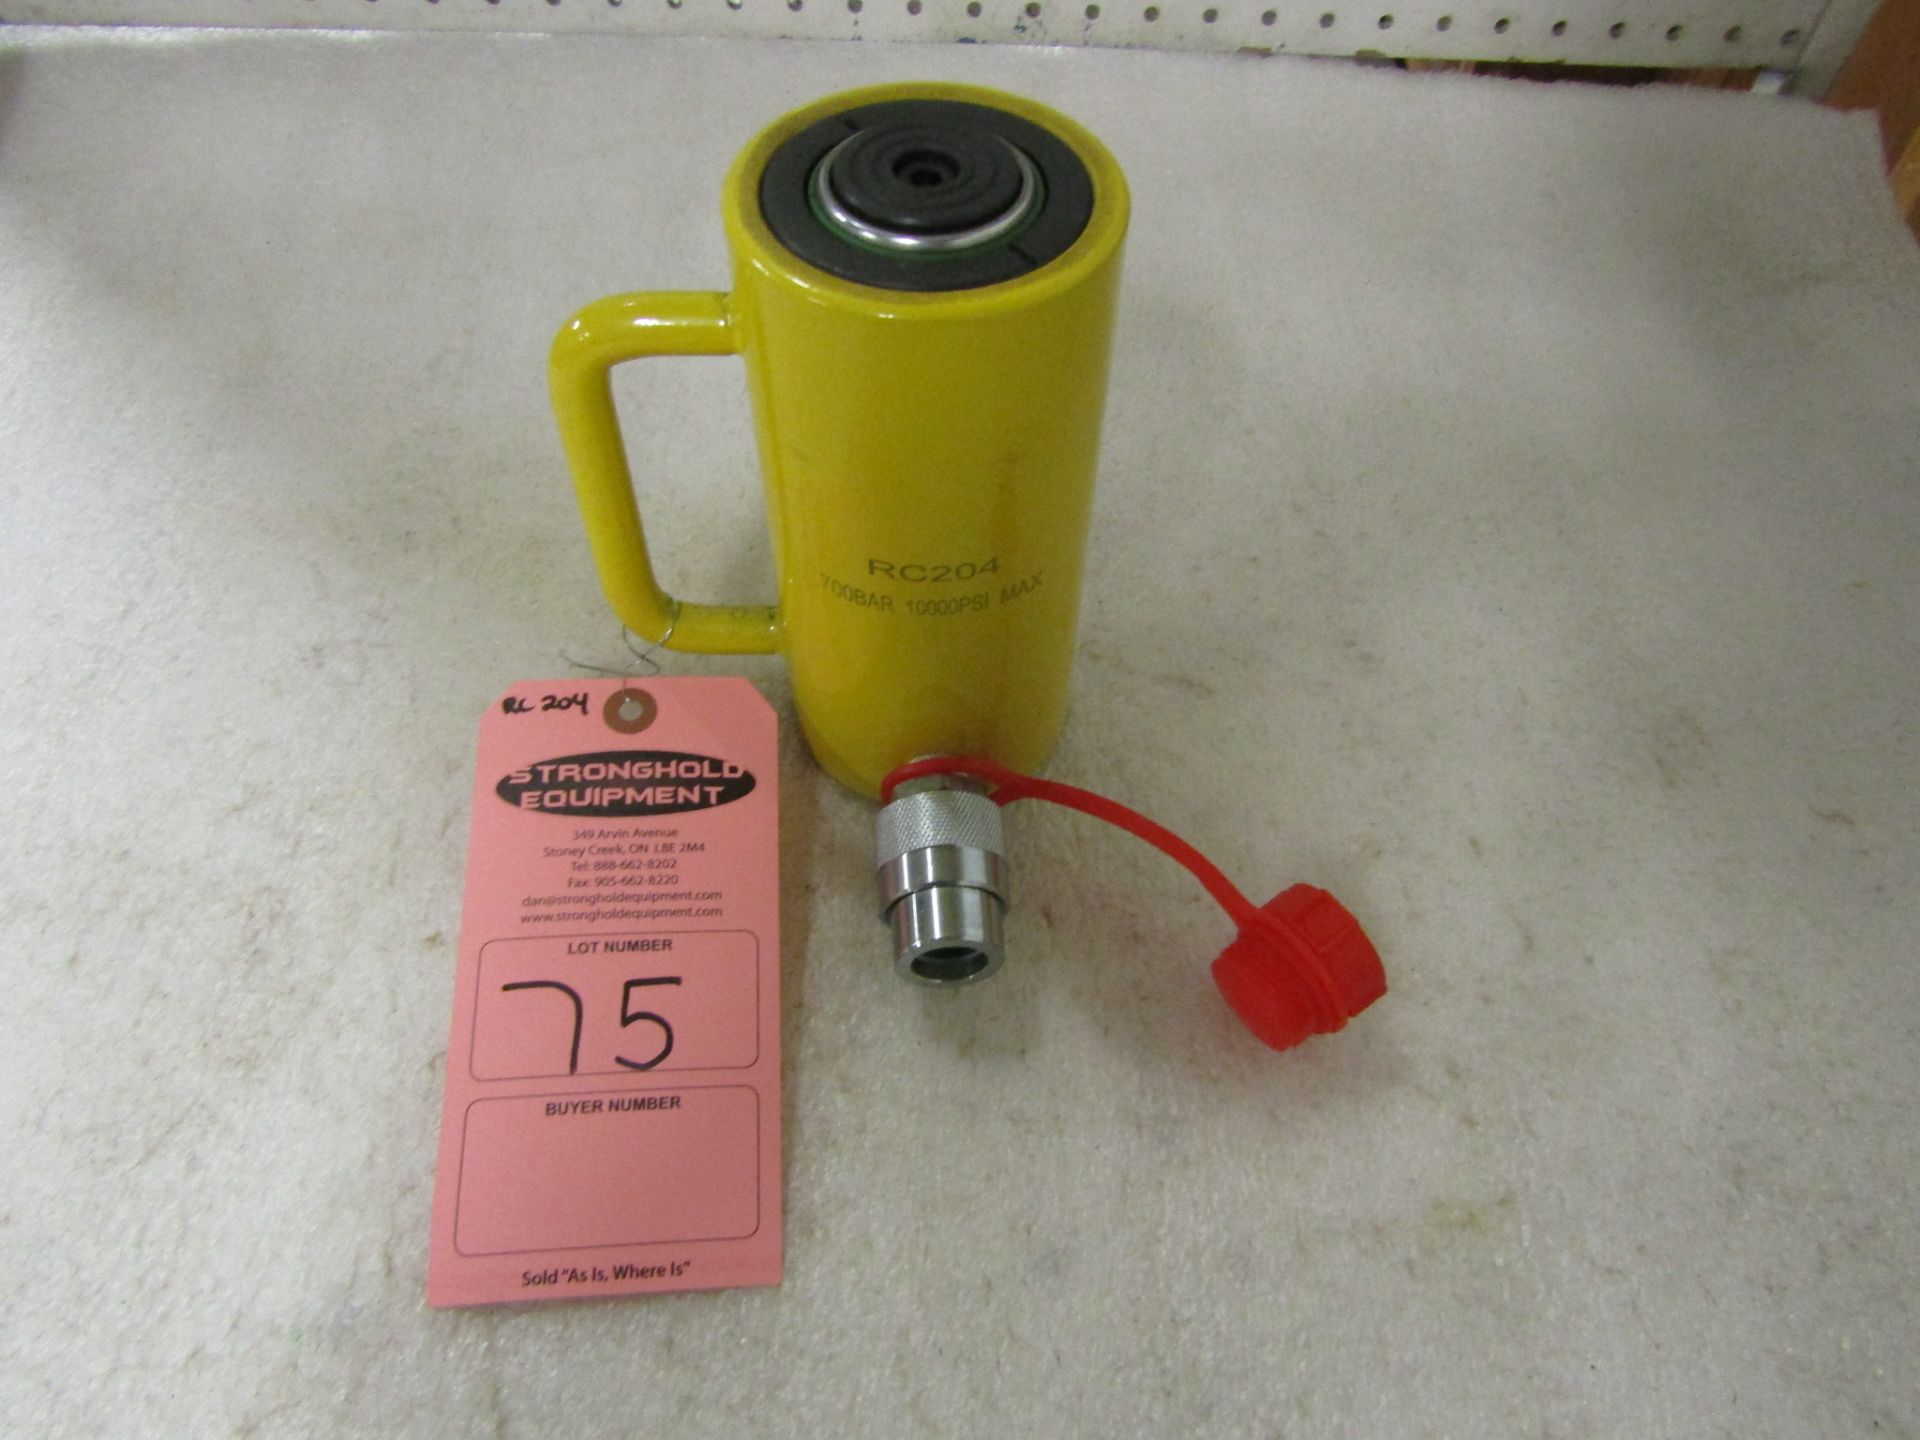 RC-204 MINT - 20 ton Hydraulic Jack with 4" stroke type cylinder